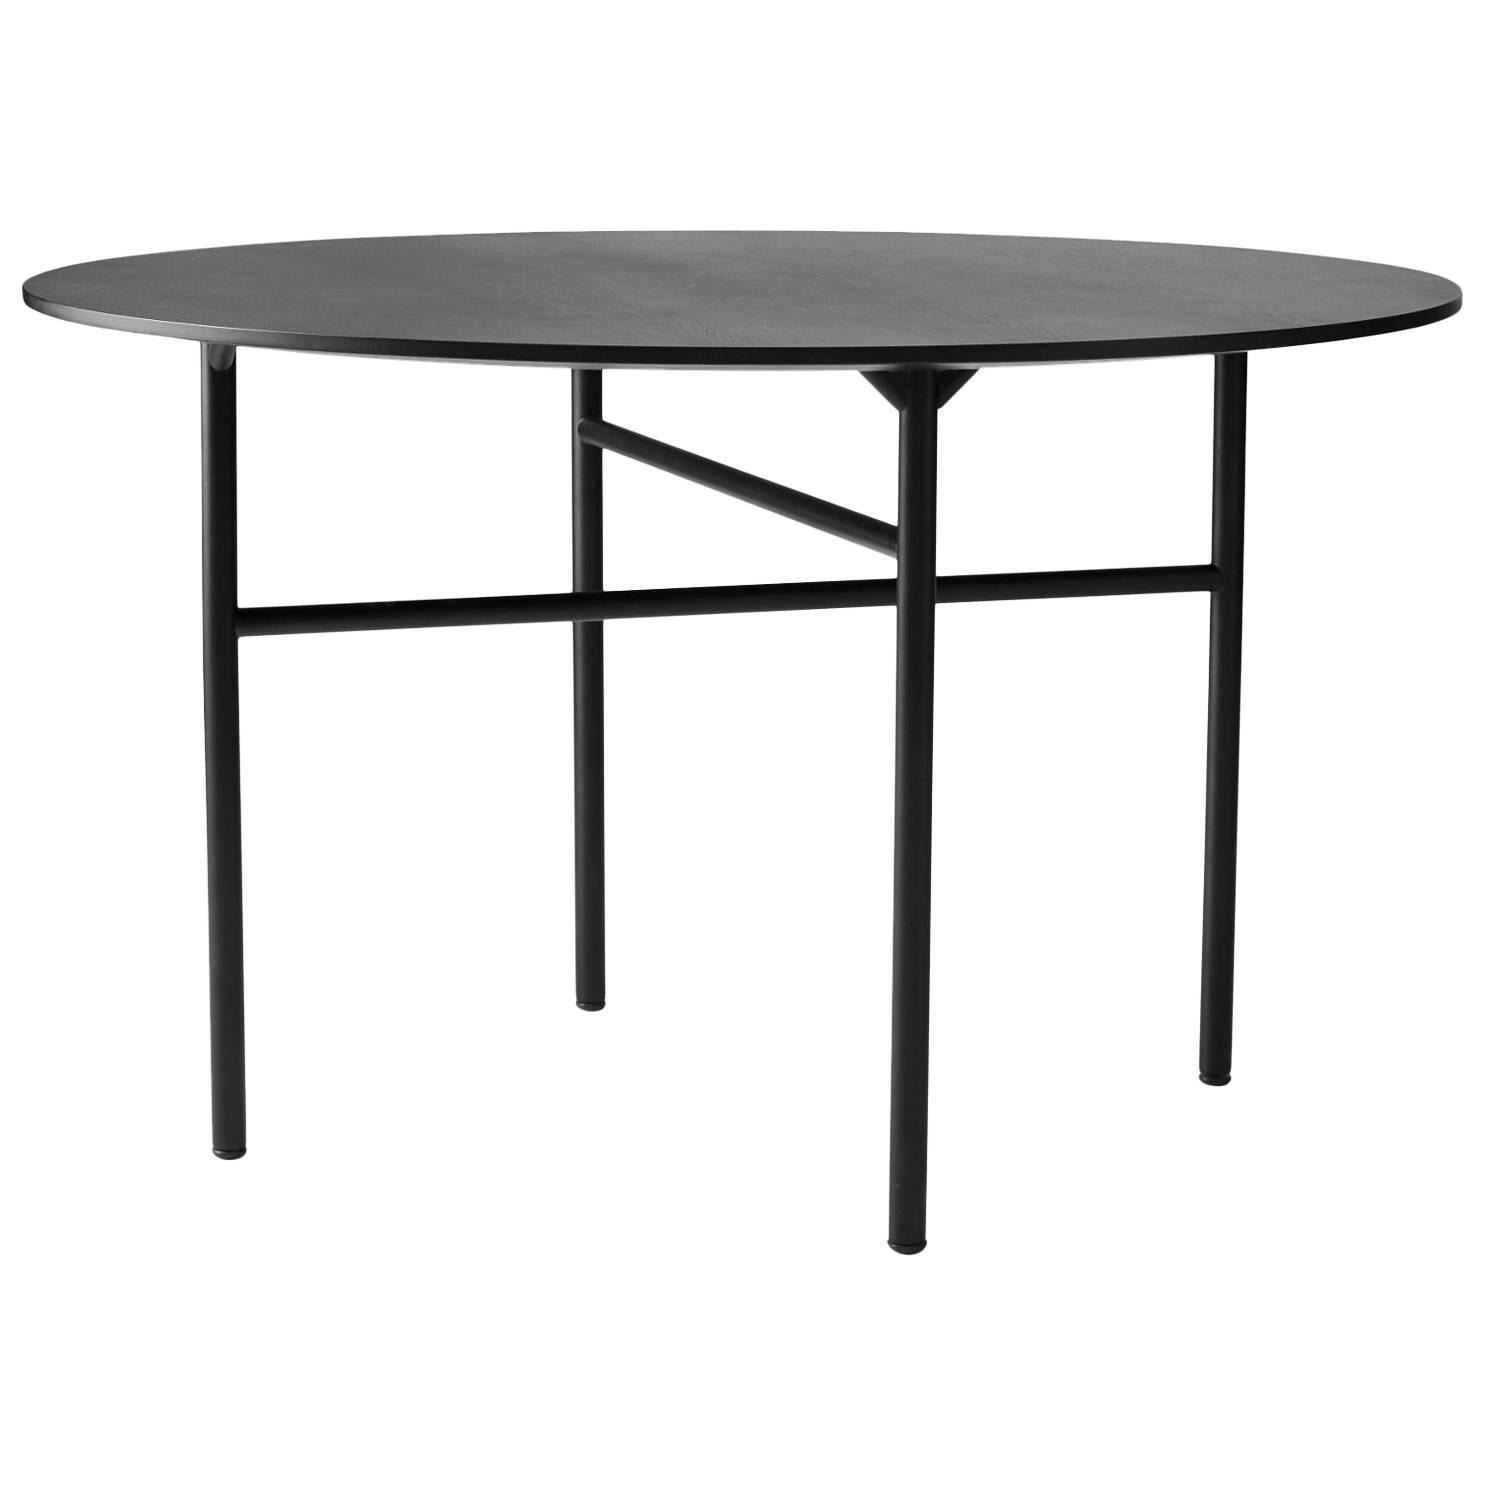 Round 47", Snaregade Table by Norm Architects, Black Veneer